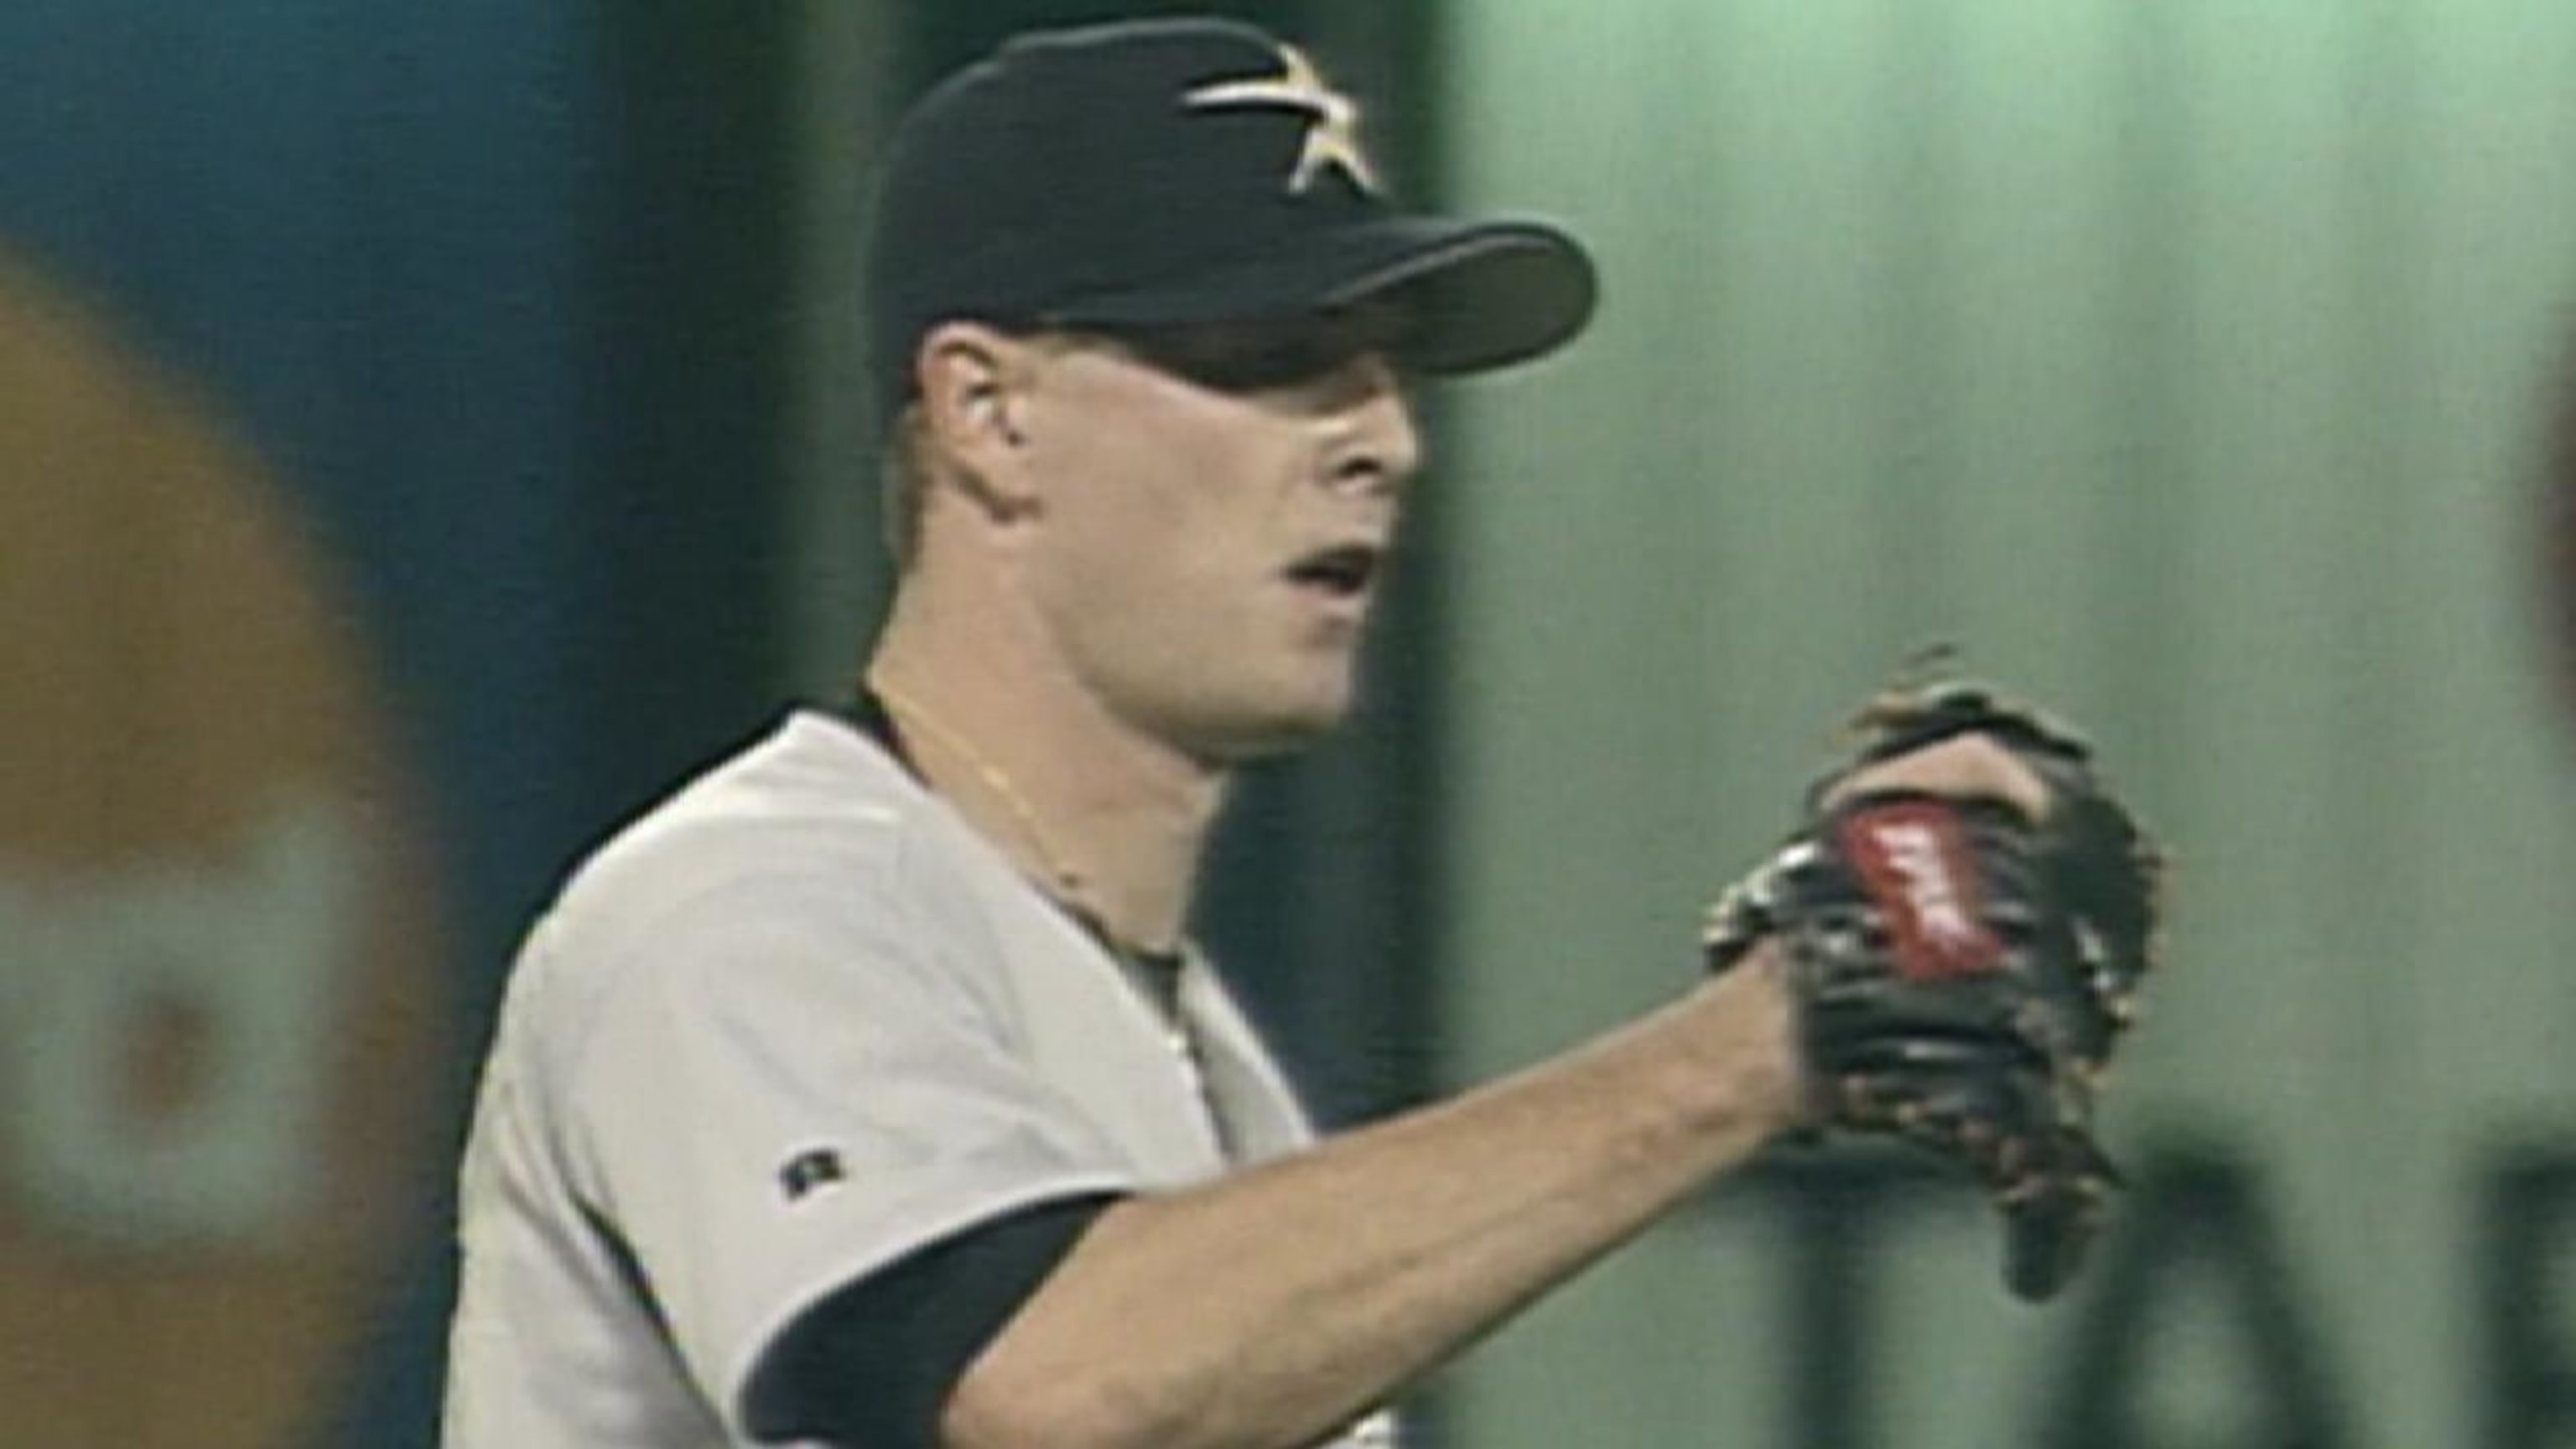 Houston Astros closer Billy Wagner points skyward after closing